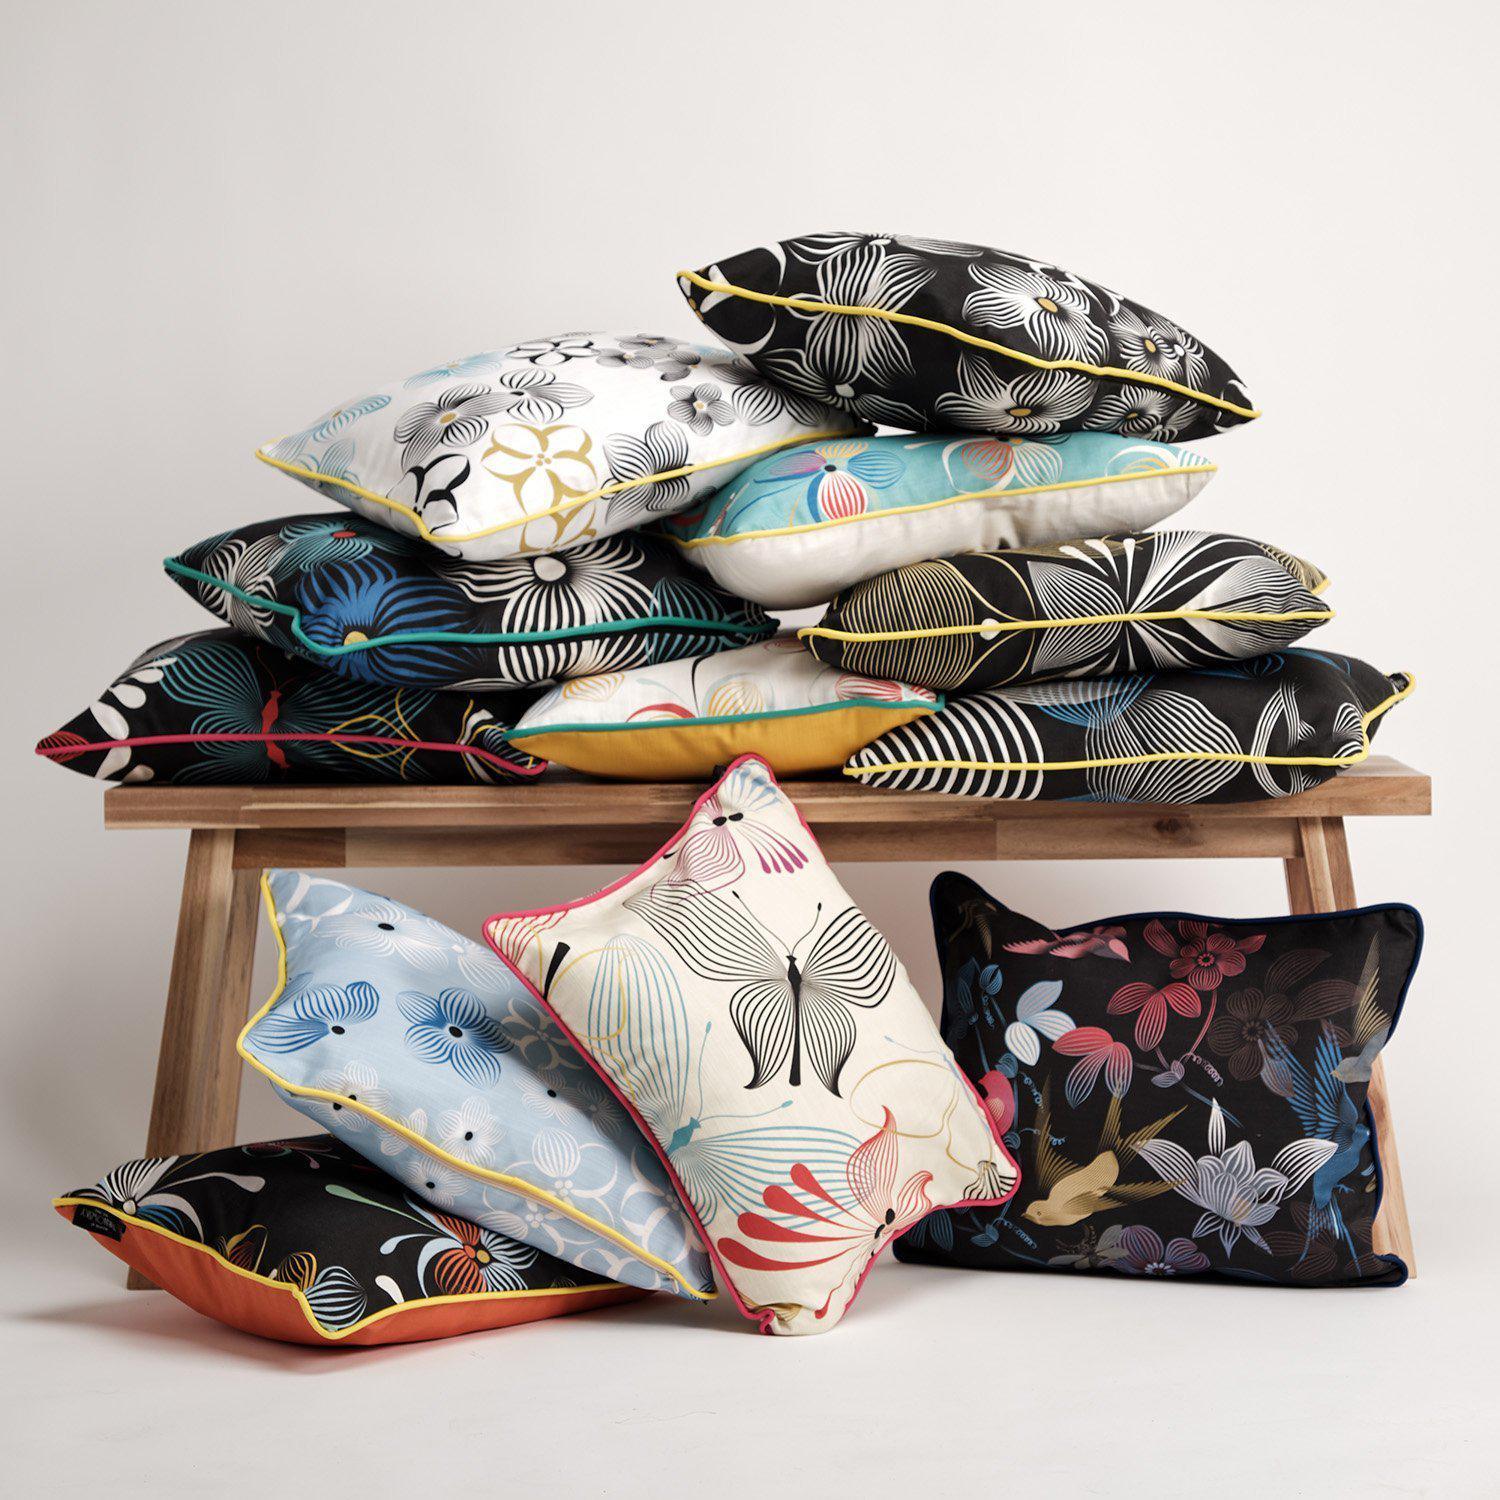 Linear Florals - Funky Art Cushion - Perfect Day - House Of Turnowsky Pillows - Handmade Cushions UK - WeLoveCushions